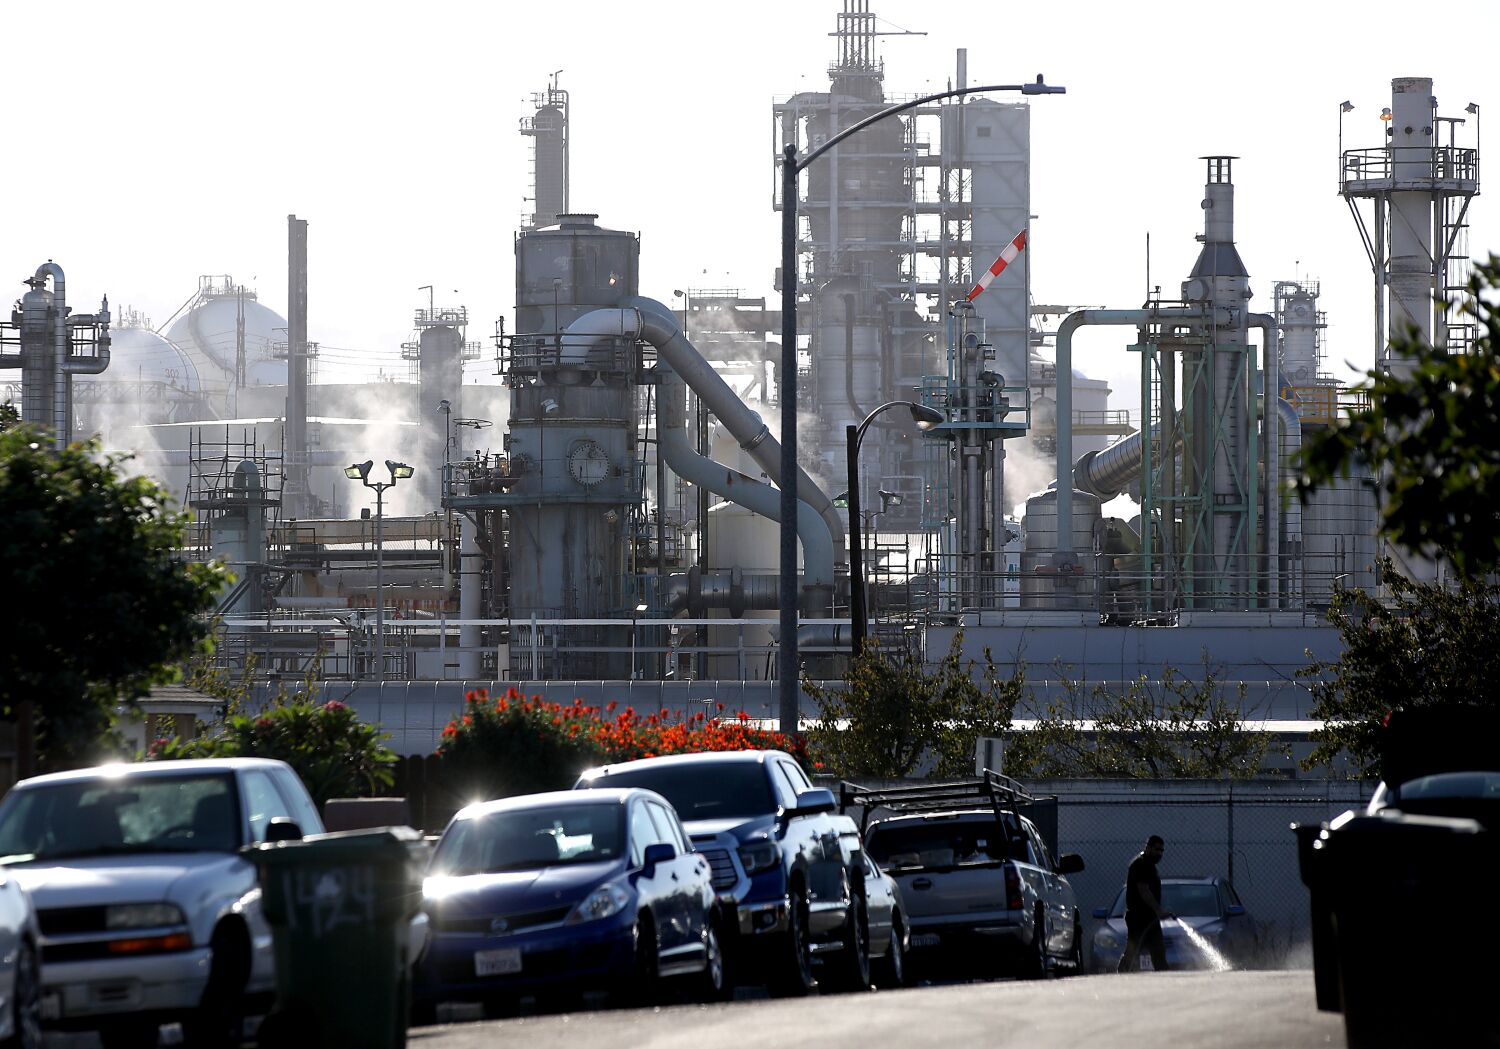 High gas costs hurt California drivers as refiners rake in huge profits. These charts explain